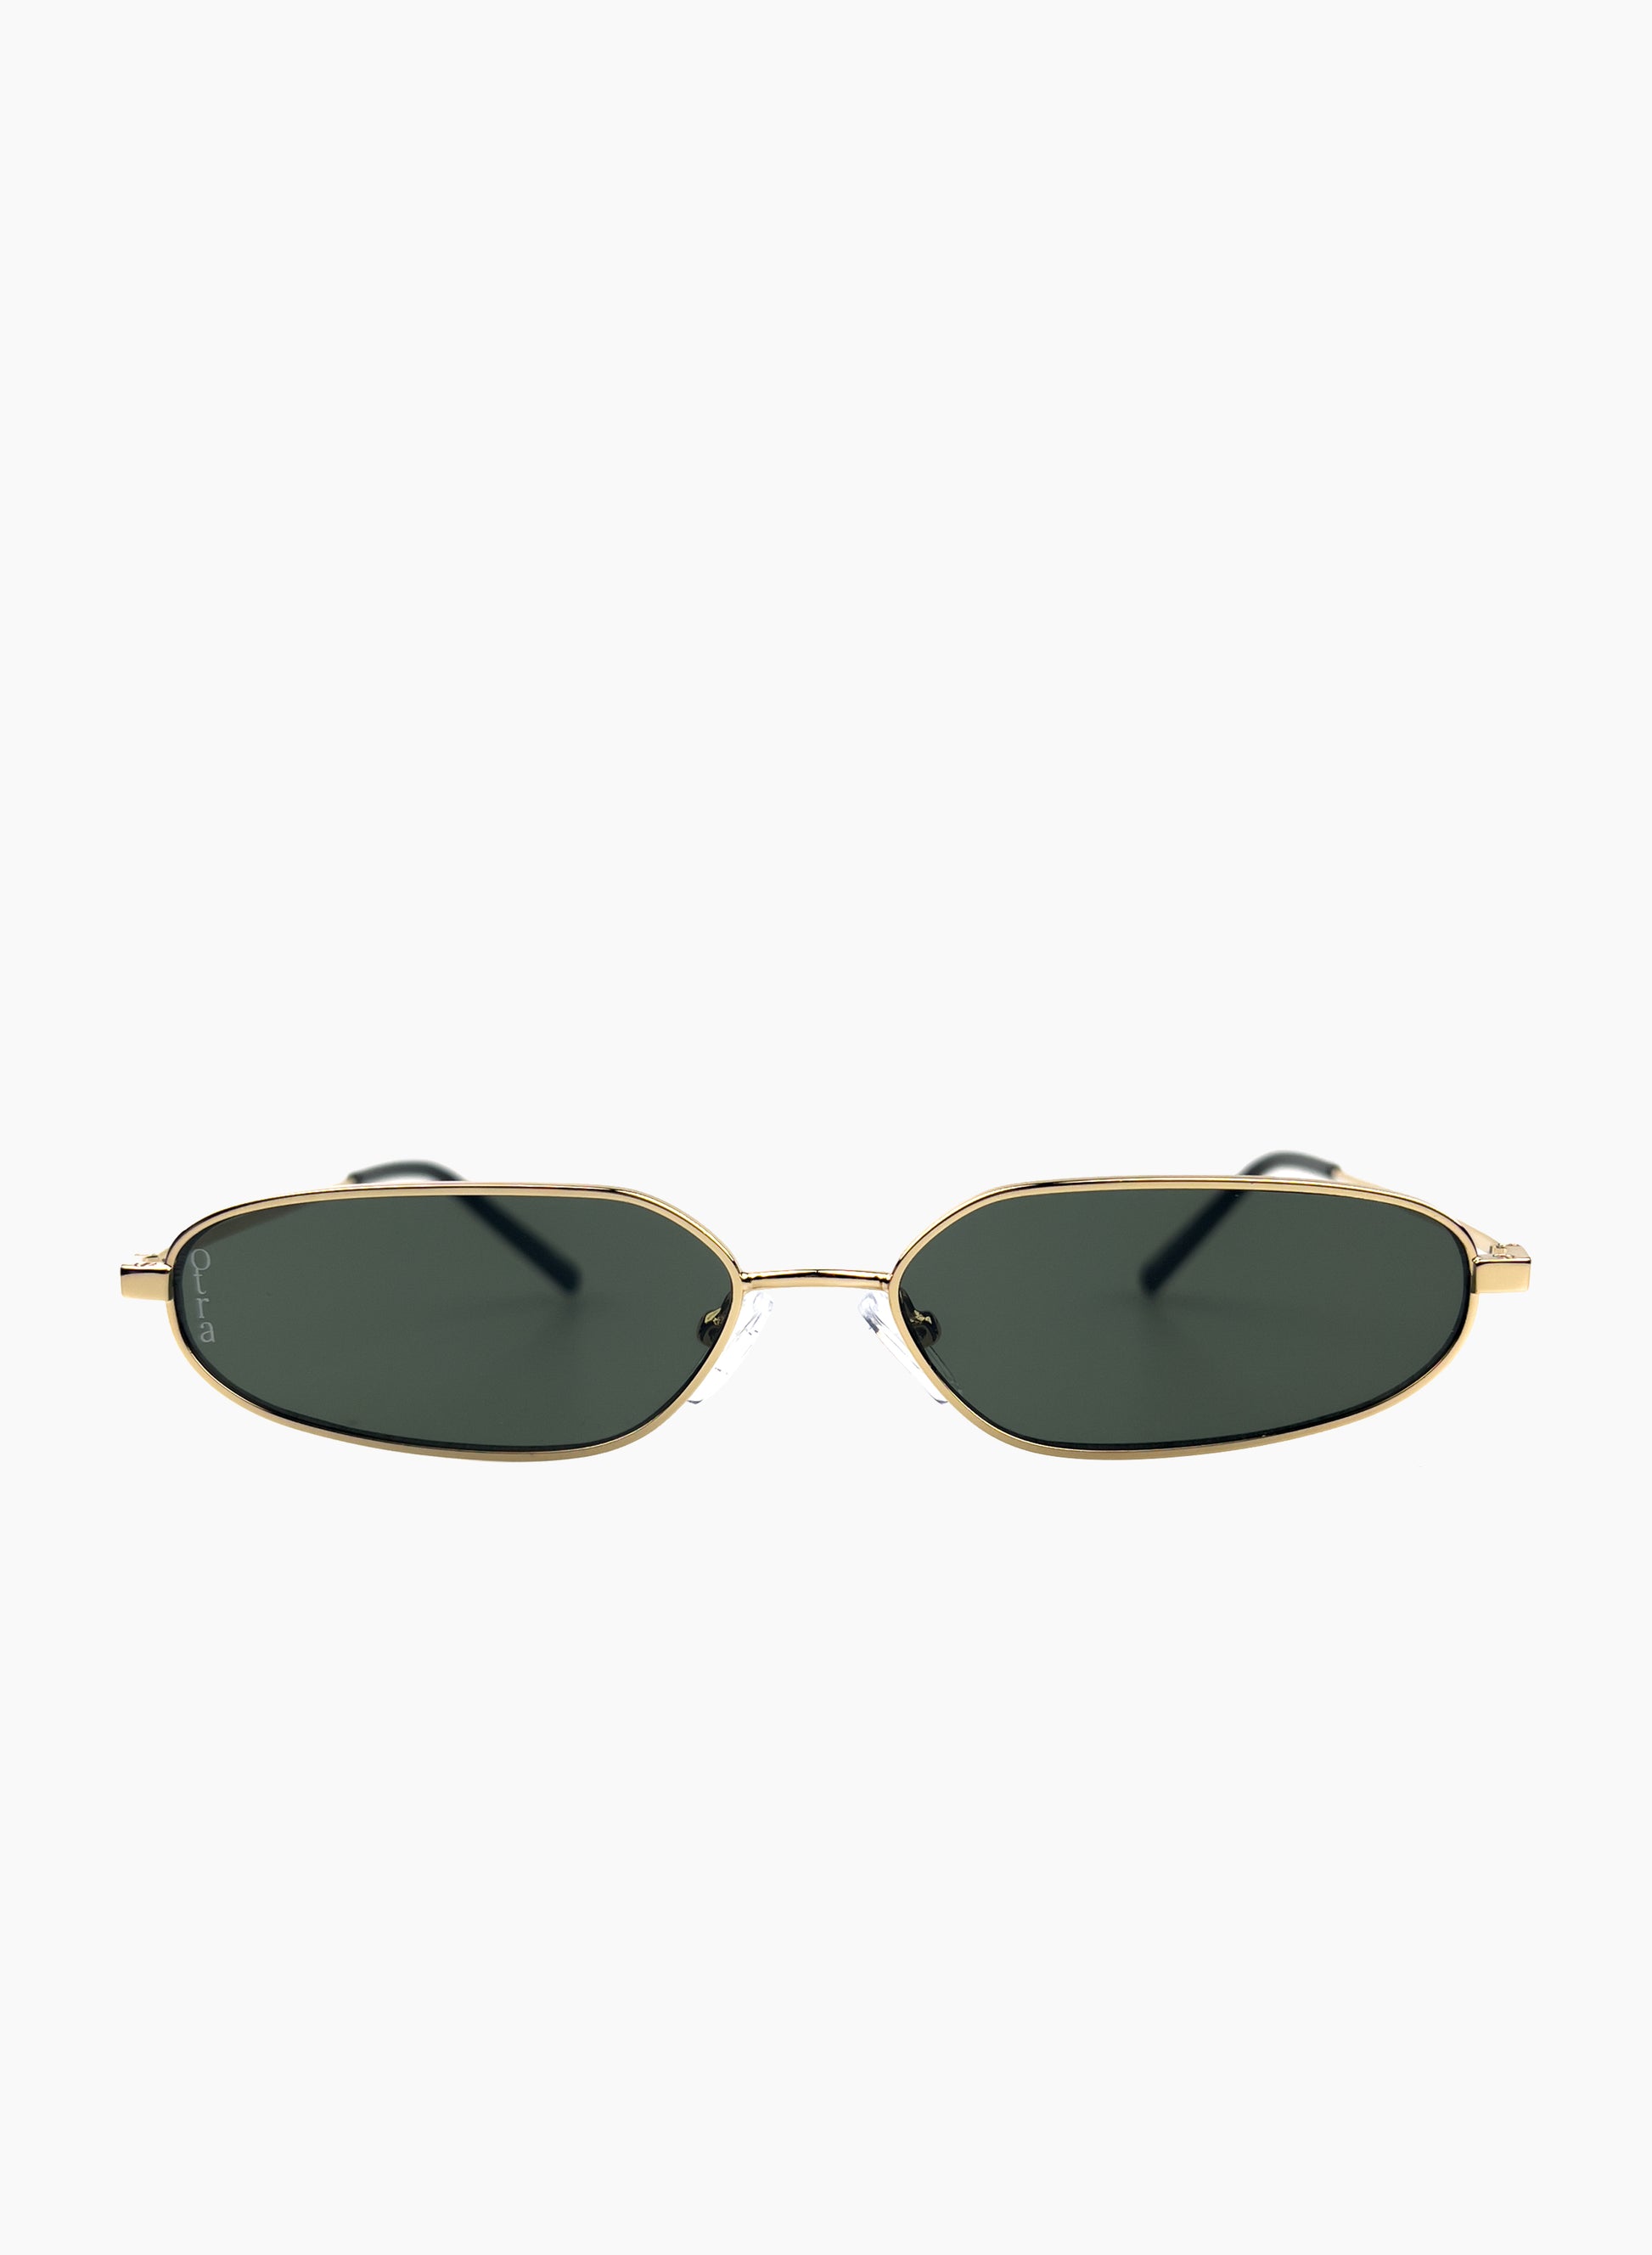 Drew metal sunglasses with gold metal frame and green lenses